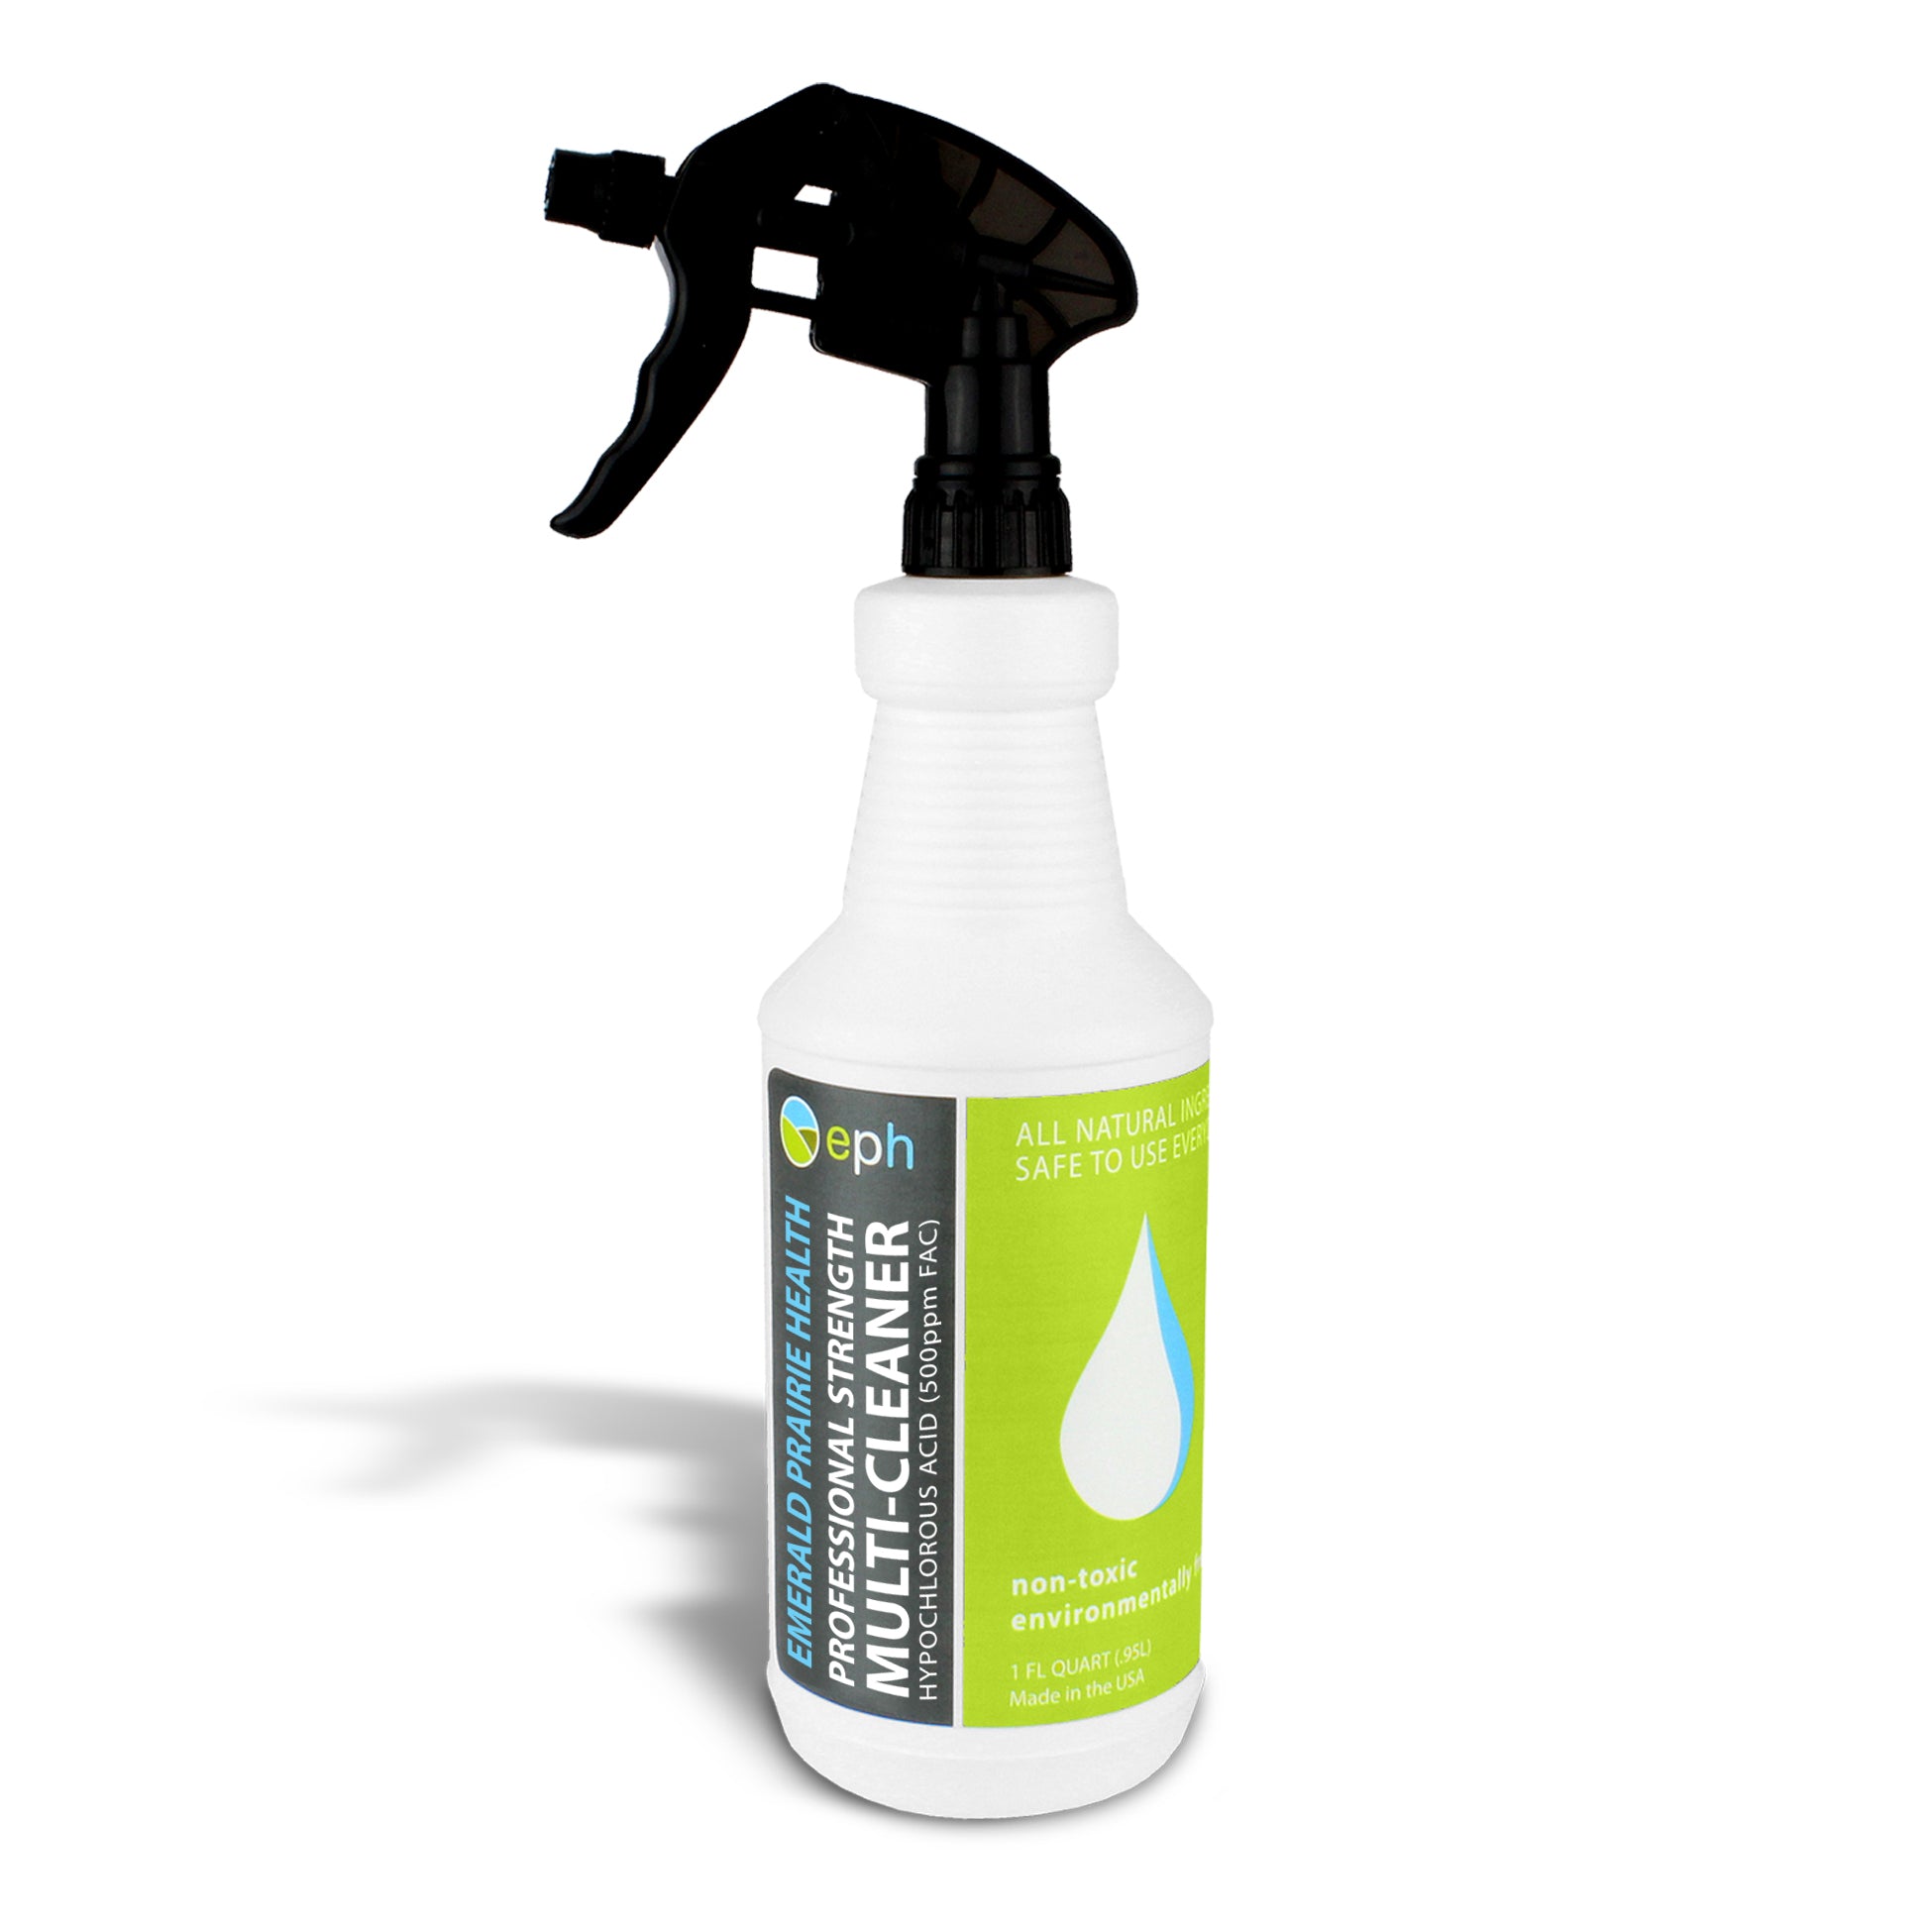 Emerald Enzyme Cleaner And Floor Surface Maintainer